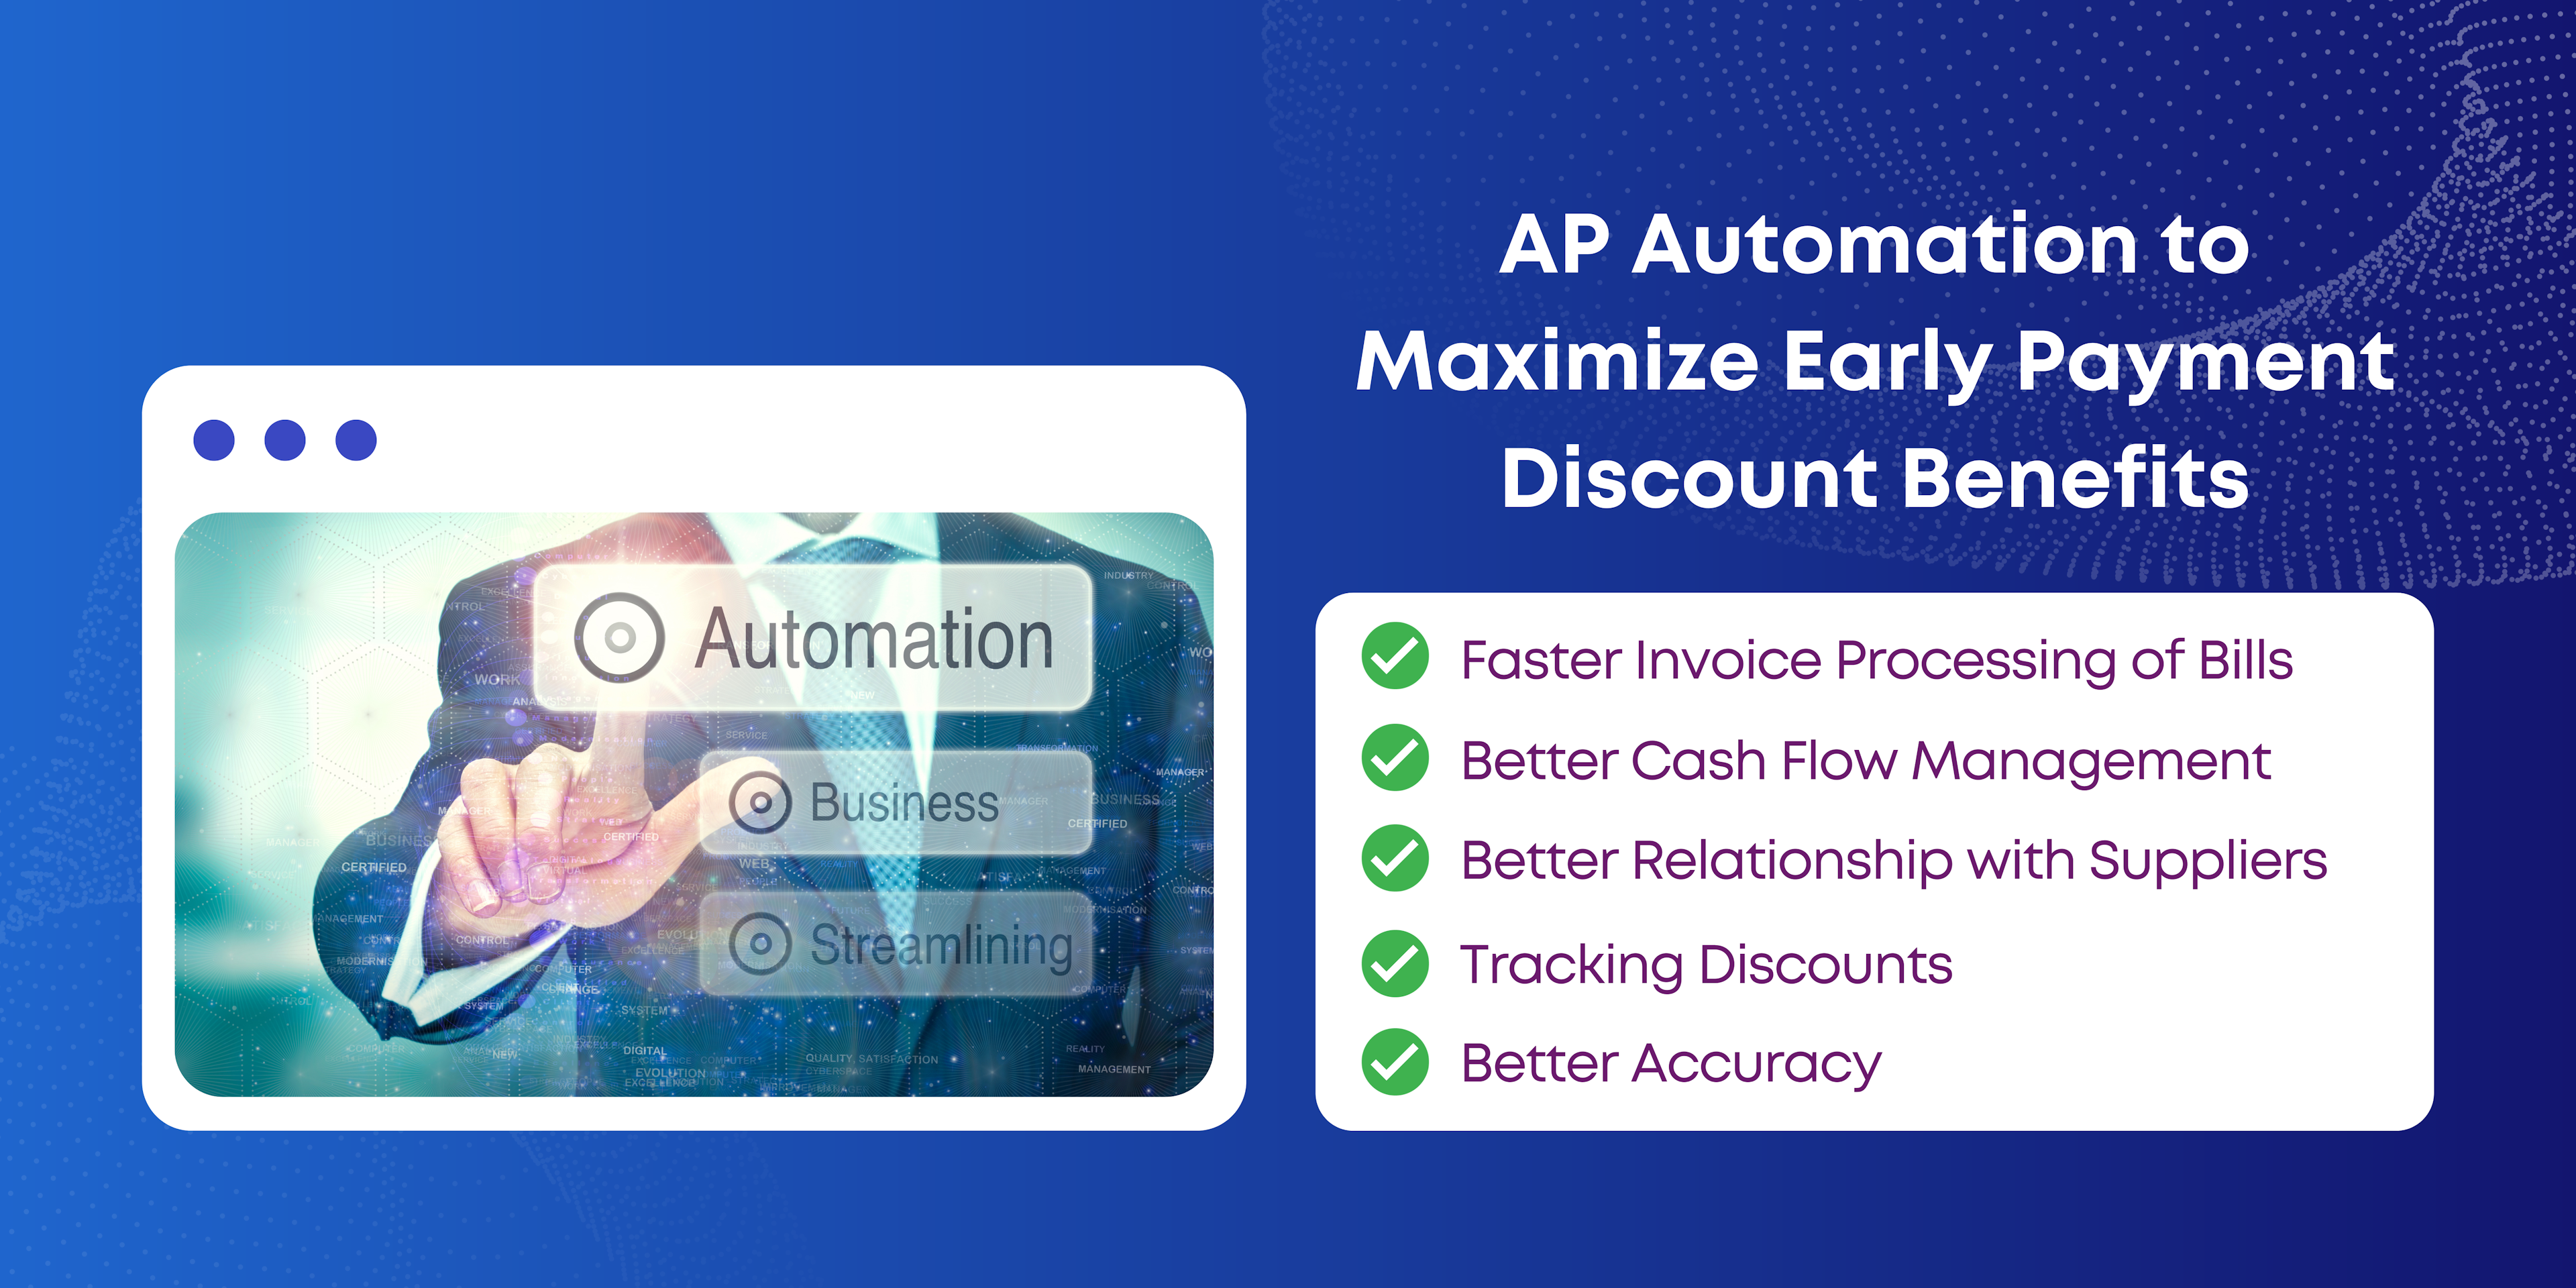 AP Automation to Maximize Early Payment Discount Benefits